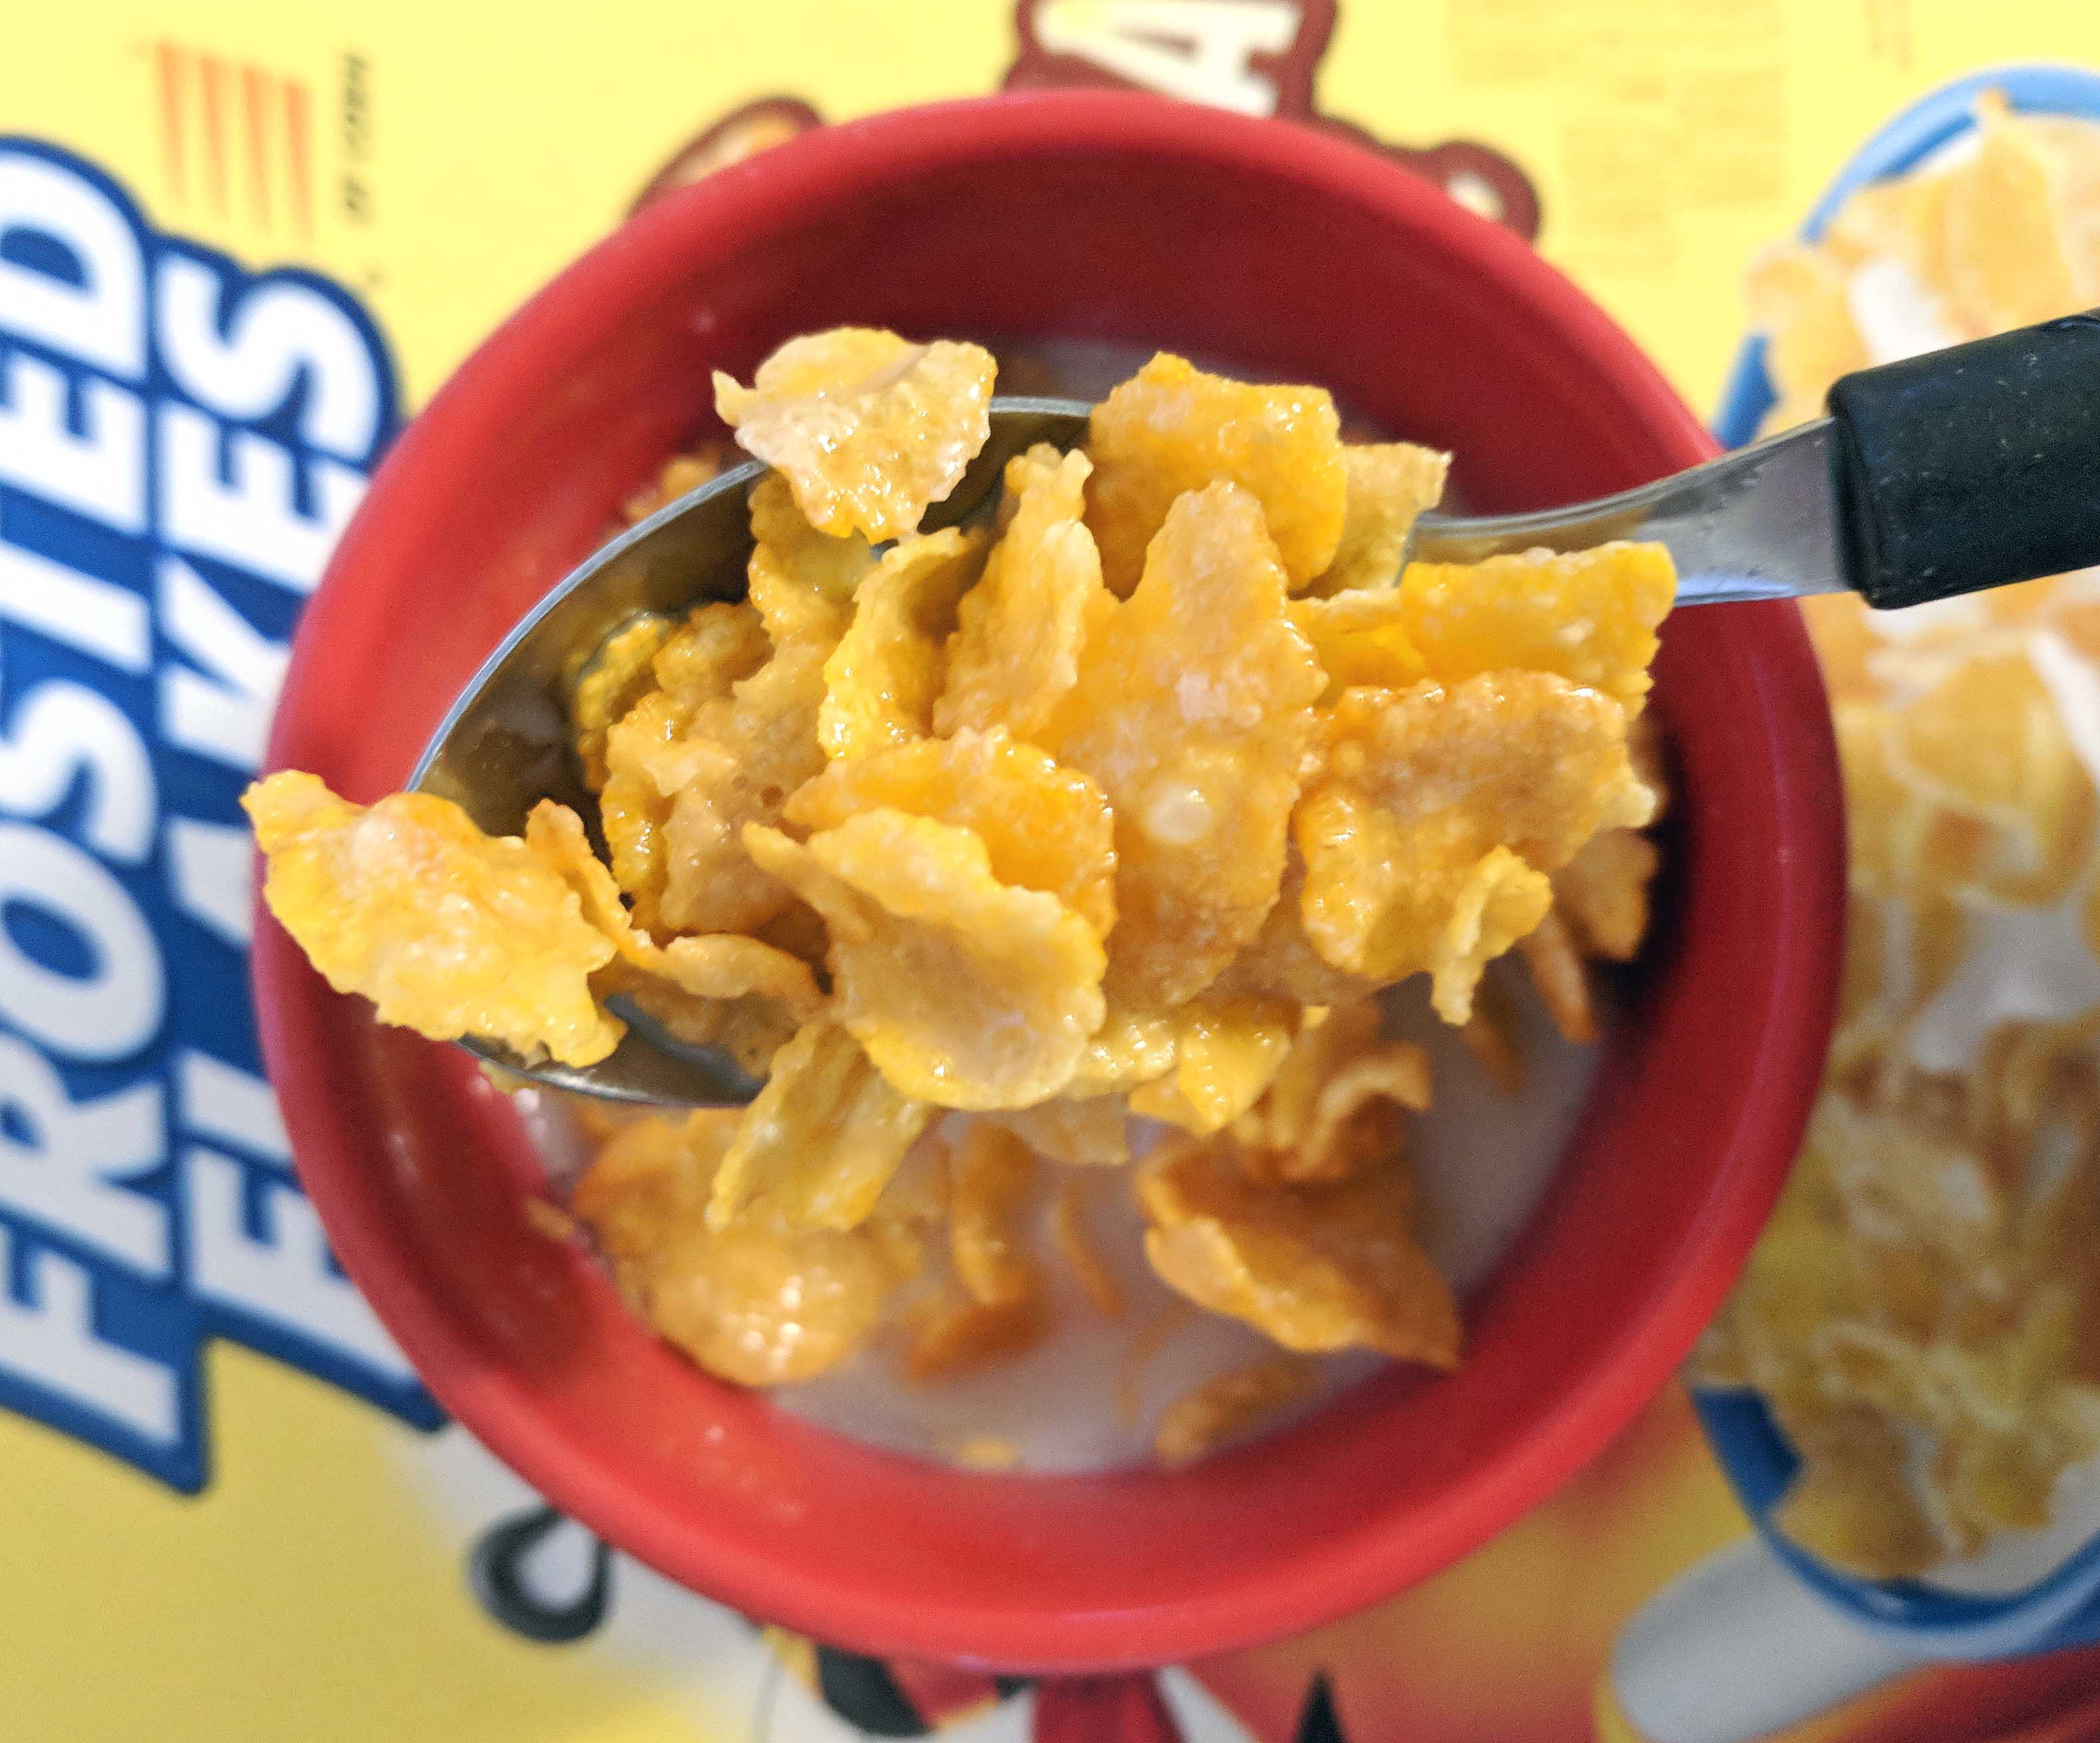 Review: Banana Creme Frosted Flakes - Cerealously